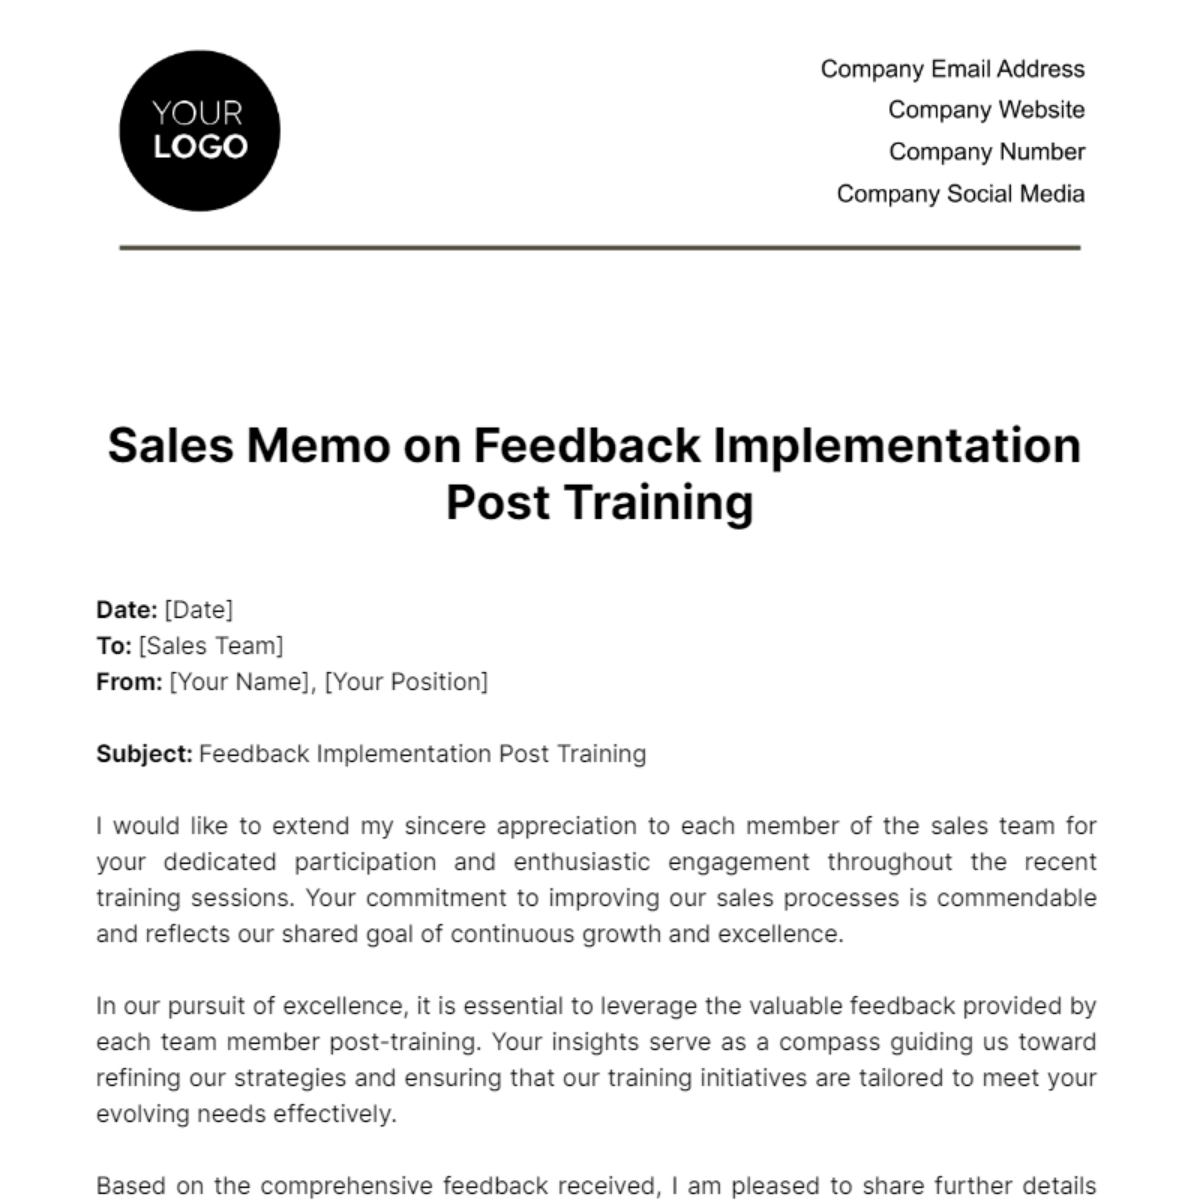 Free Sales Memo on Feedback Implementation Post Training Template